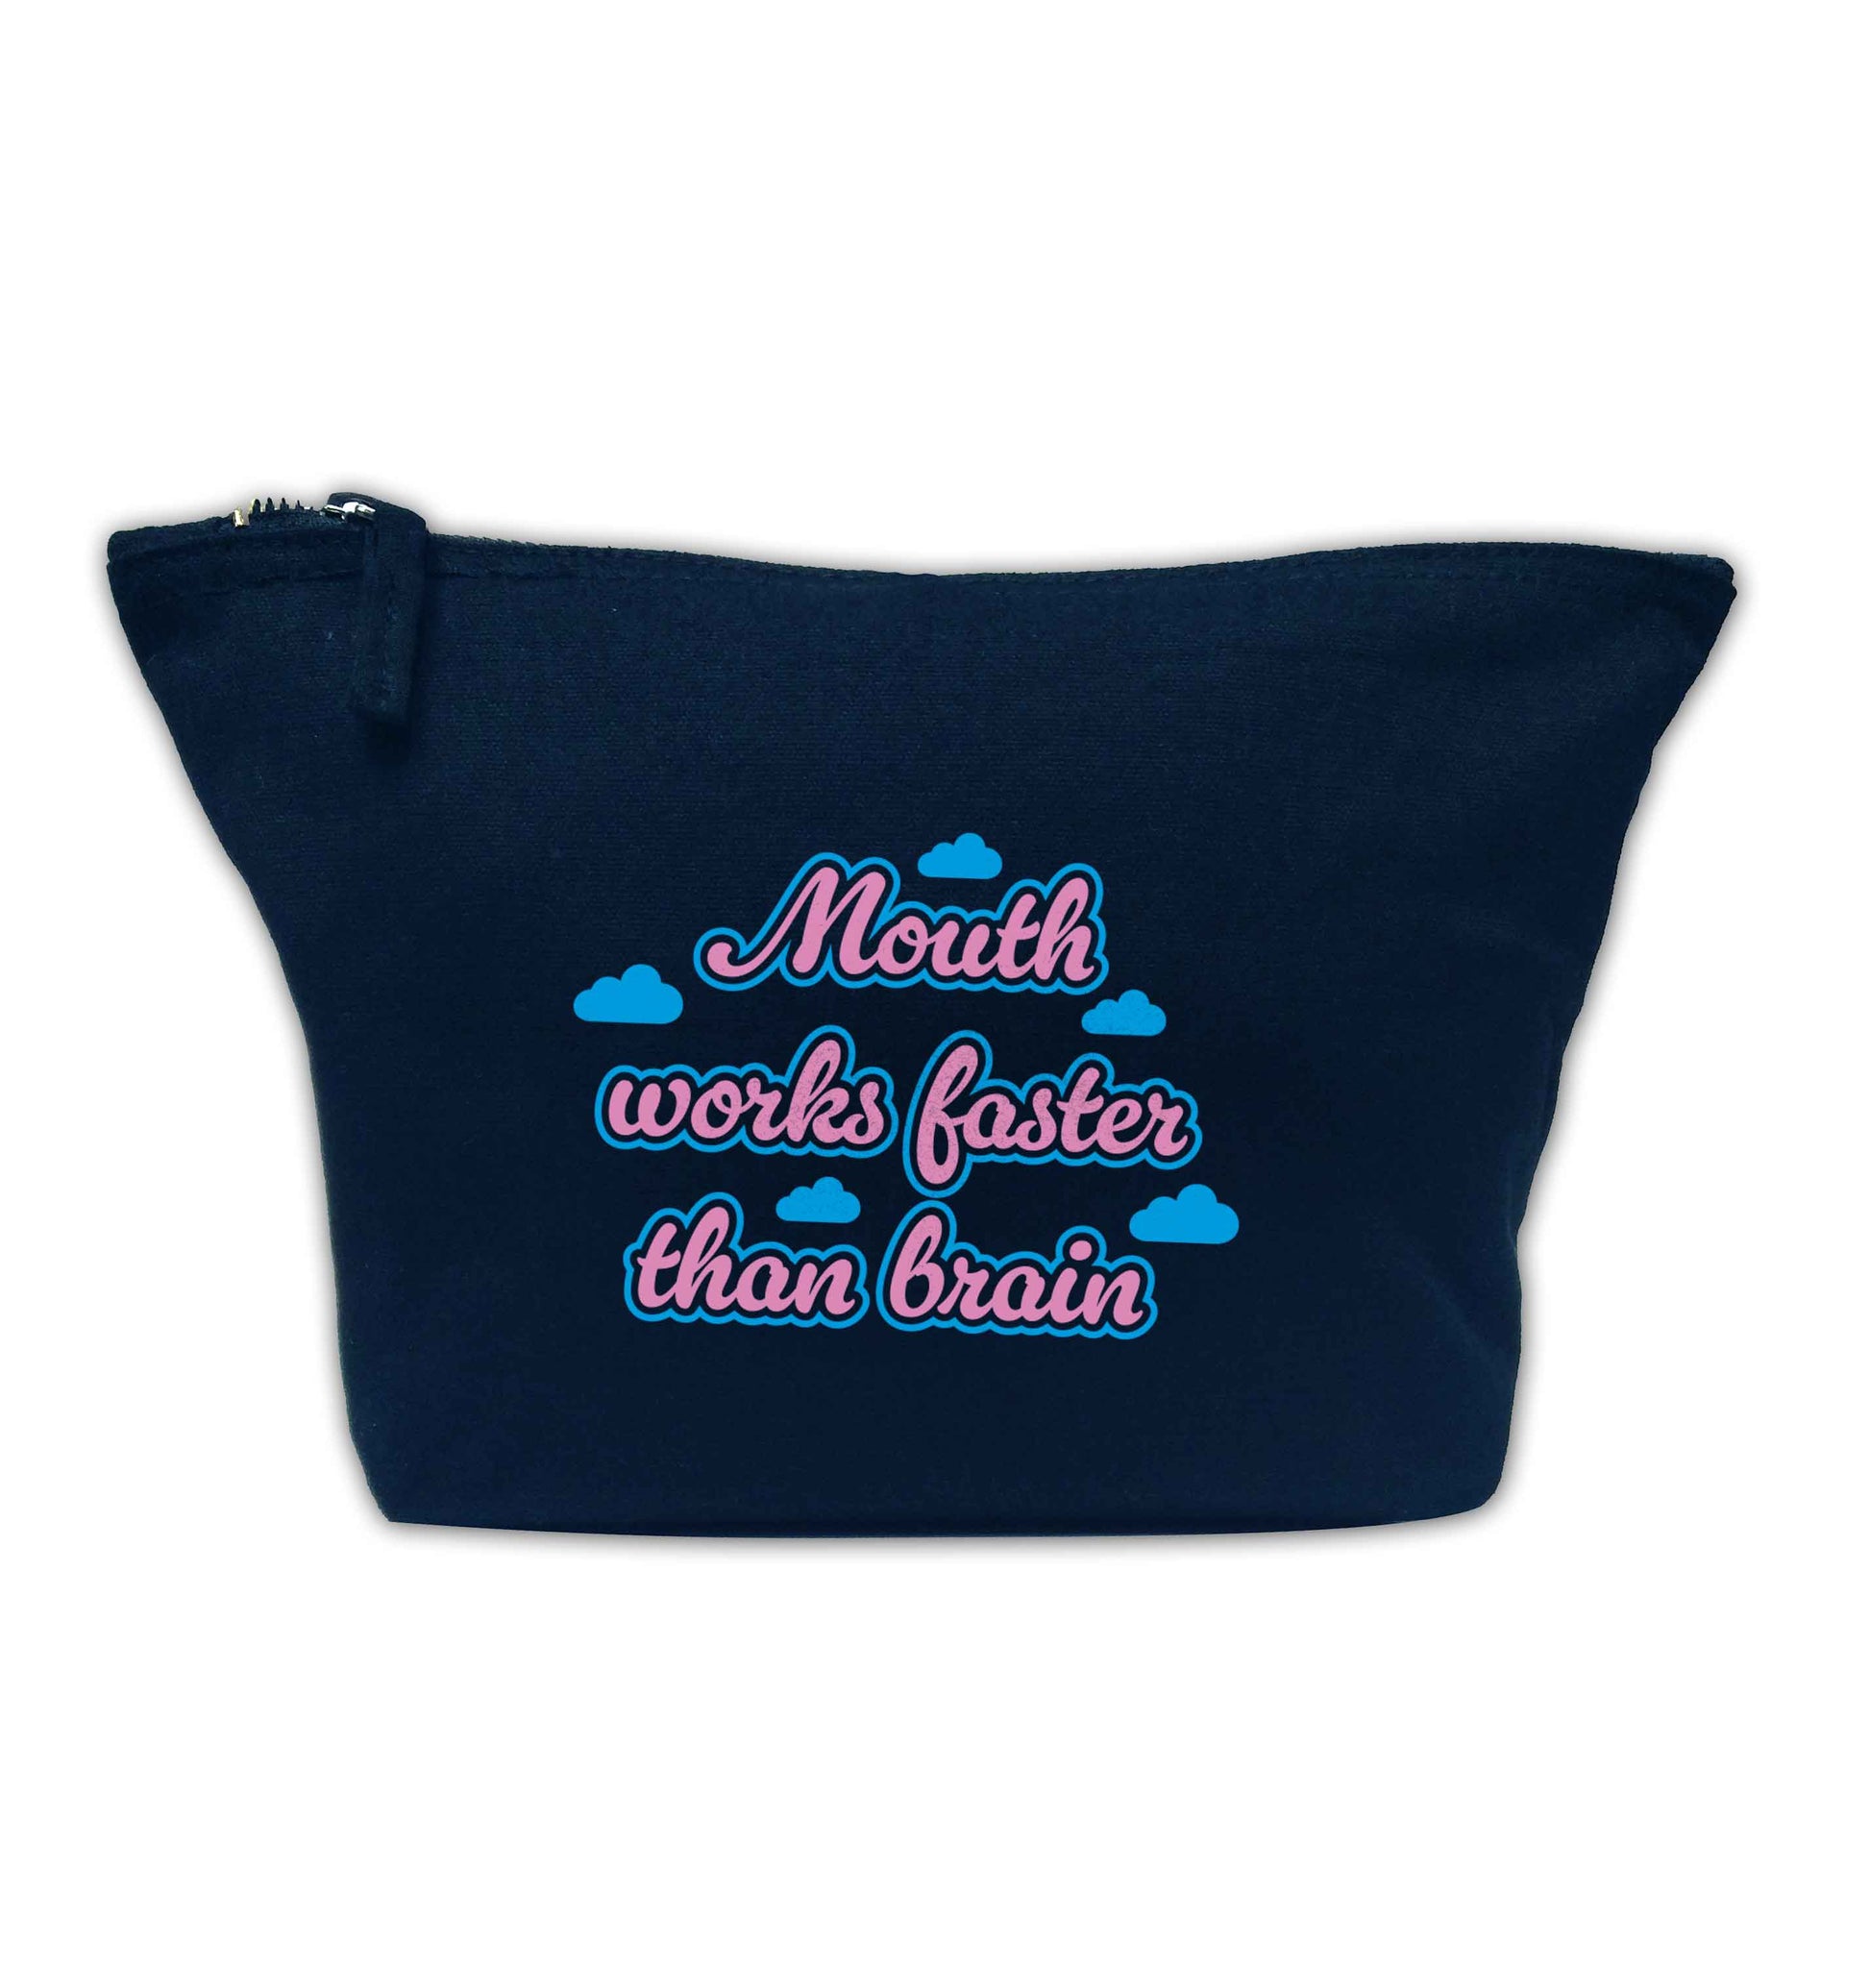 Mouth works faster than brain navy makeup bag